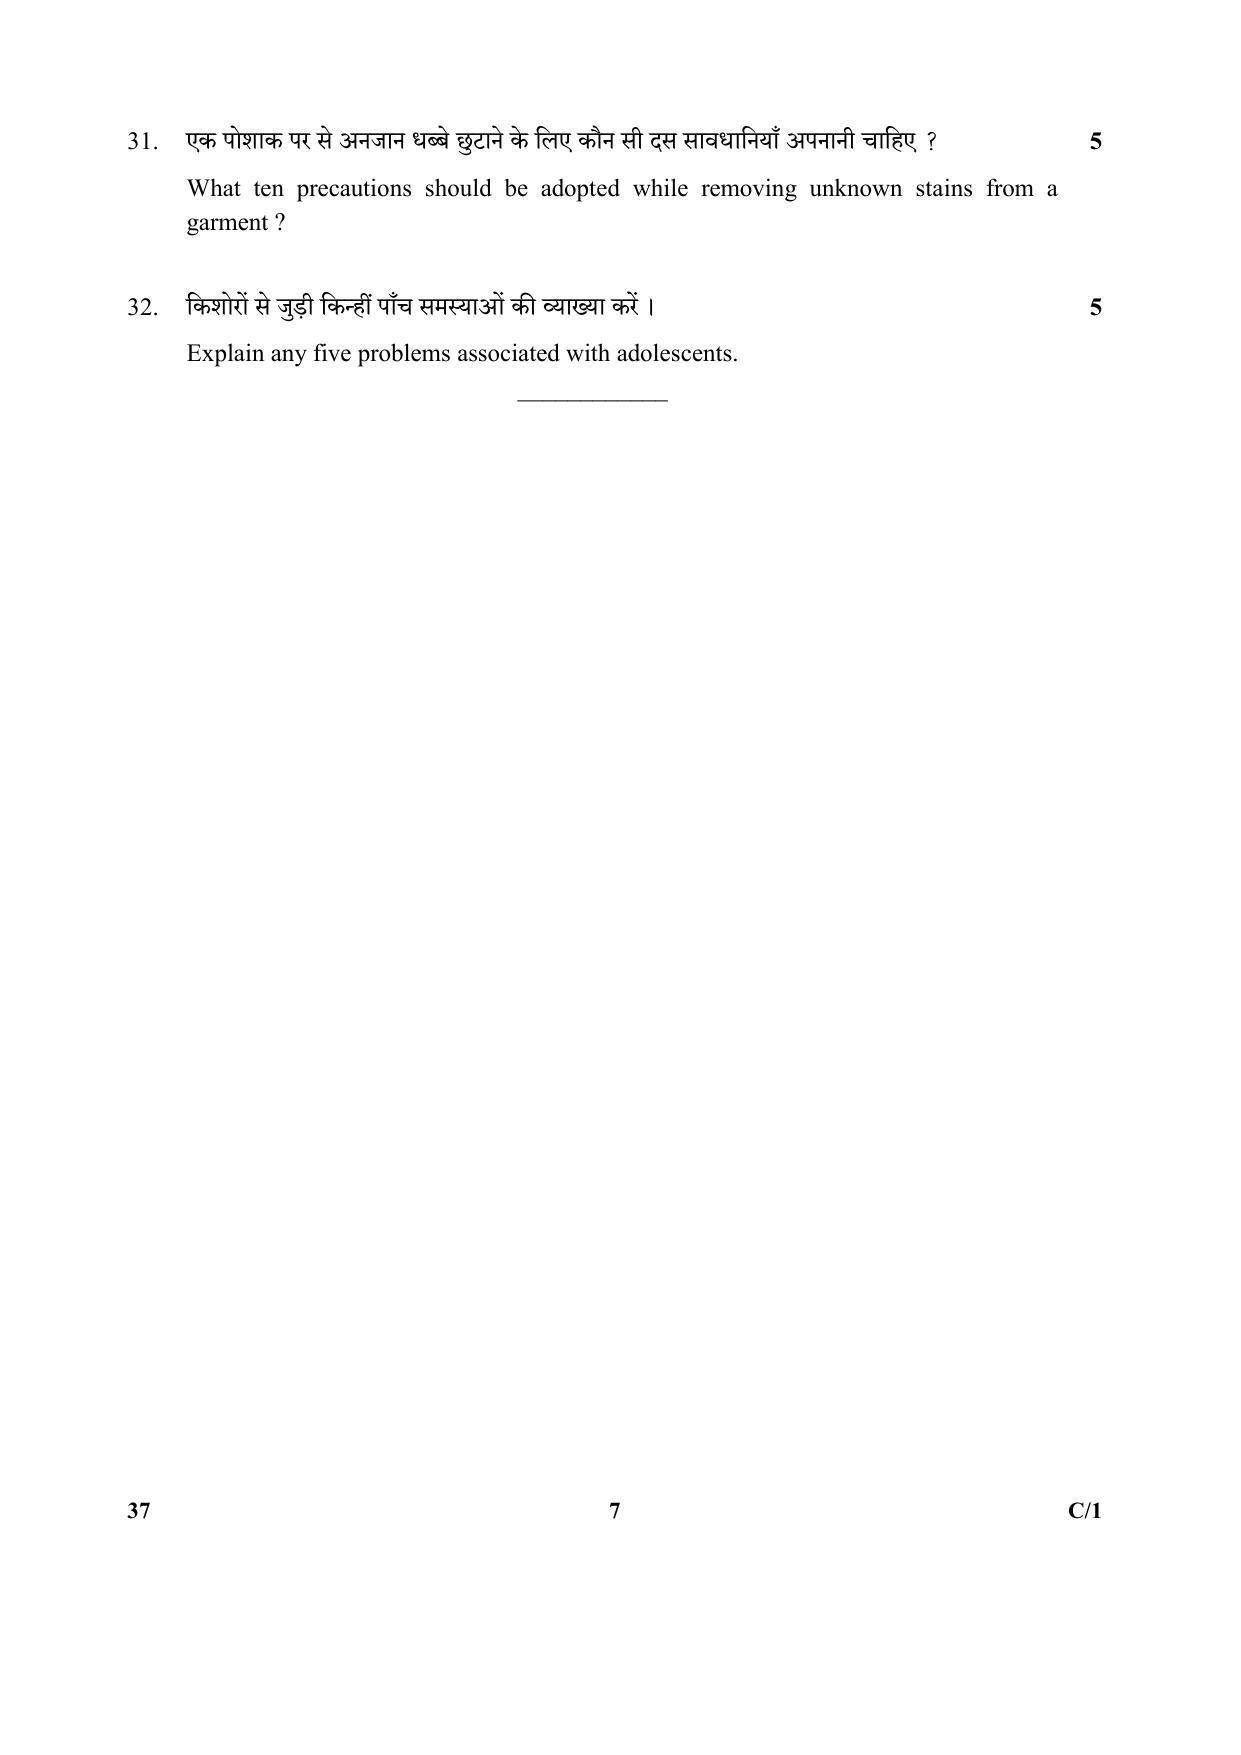 CBSE Class 10 37 (Home Science) 2018 Compartment Question Paper - Page 7